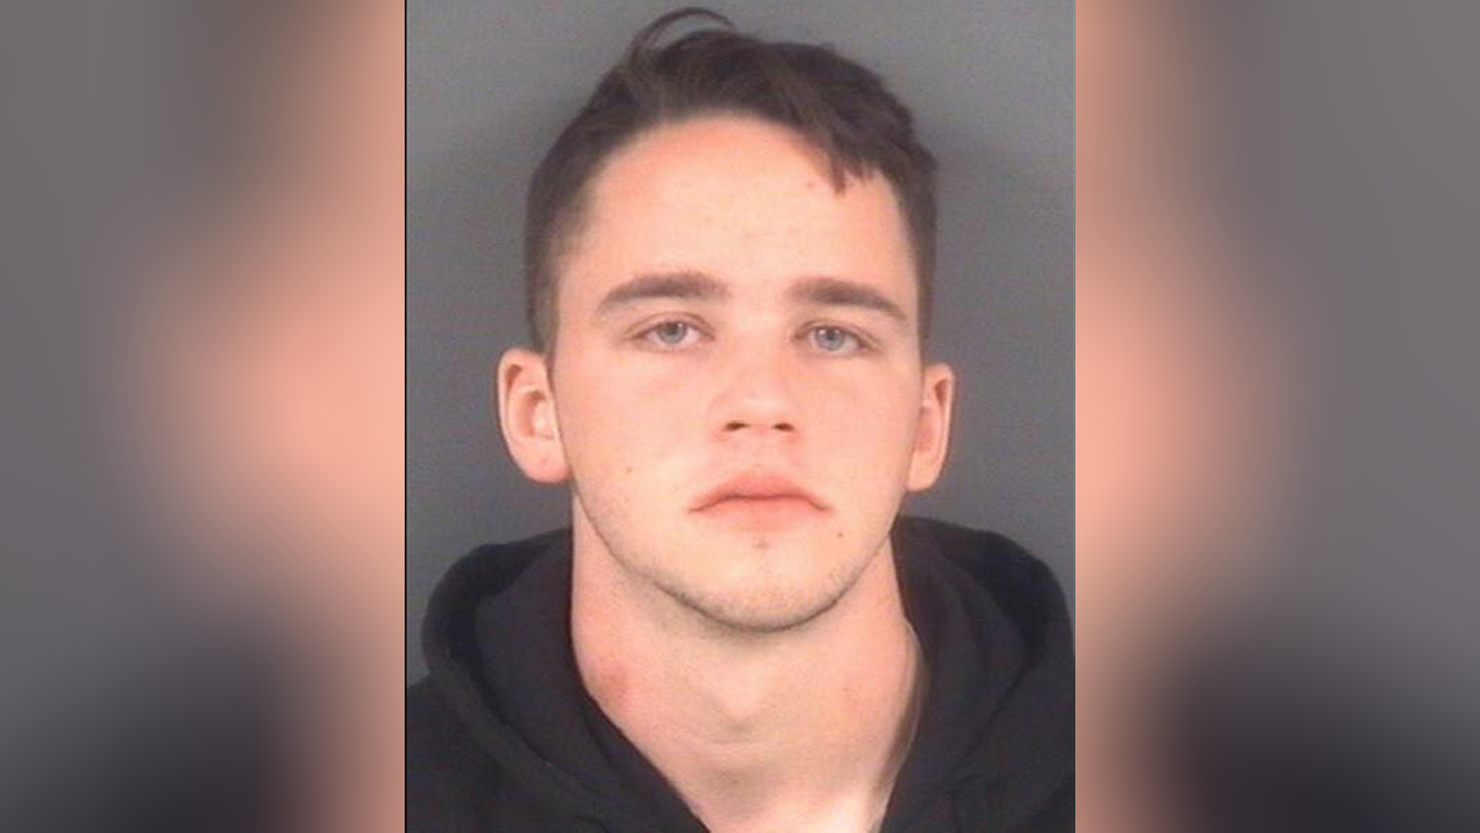 Fort Bragg Paratrooper accused of kidnapping, raping 12-year-old girl